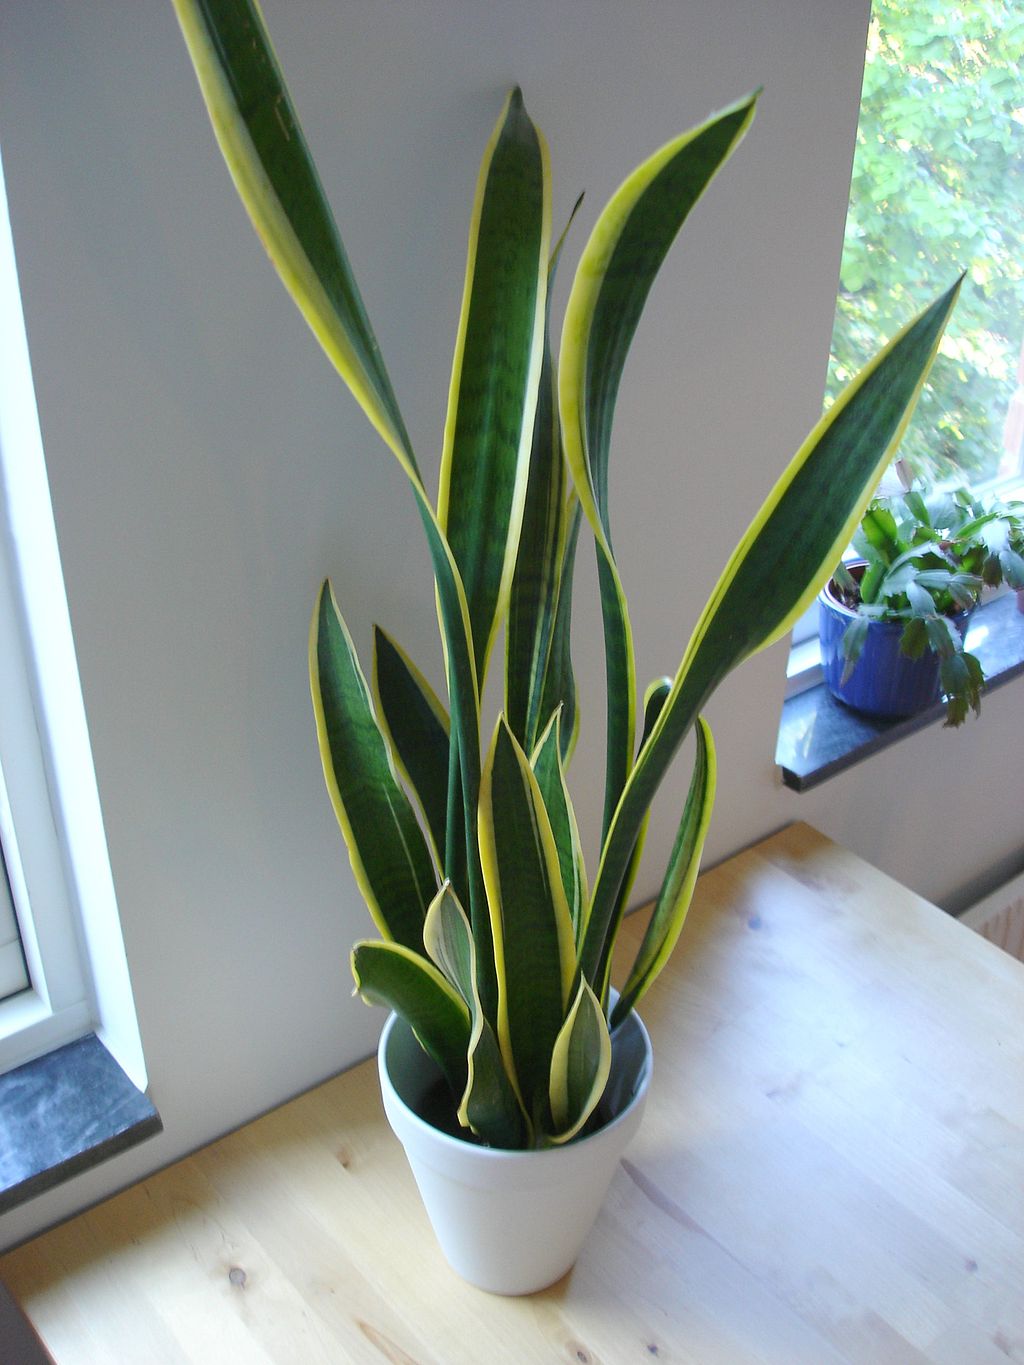 This plant is called "Snake plant" or "Mother-in-Law's tongue" in English.